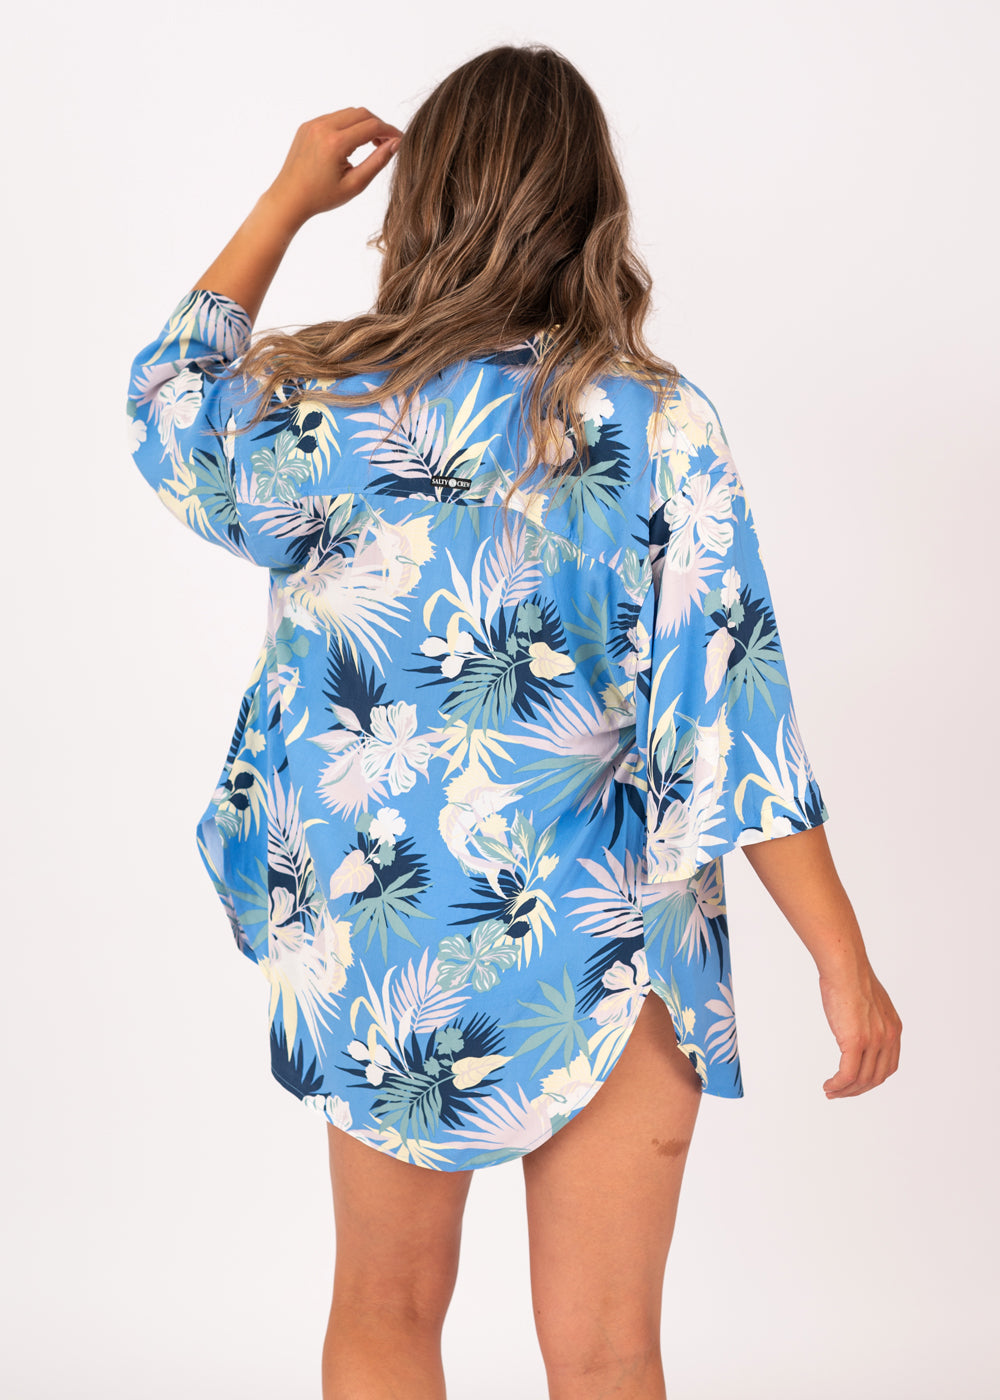 Desert Island Cover Up in Bahama Blue by Salty Crew – The Beach